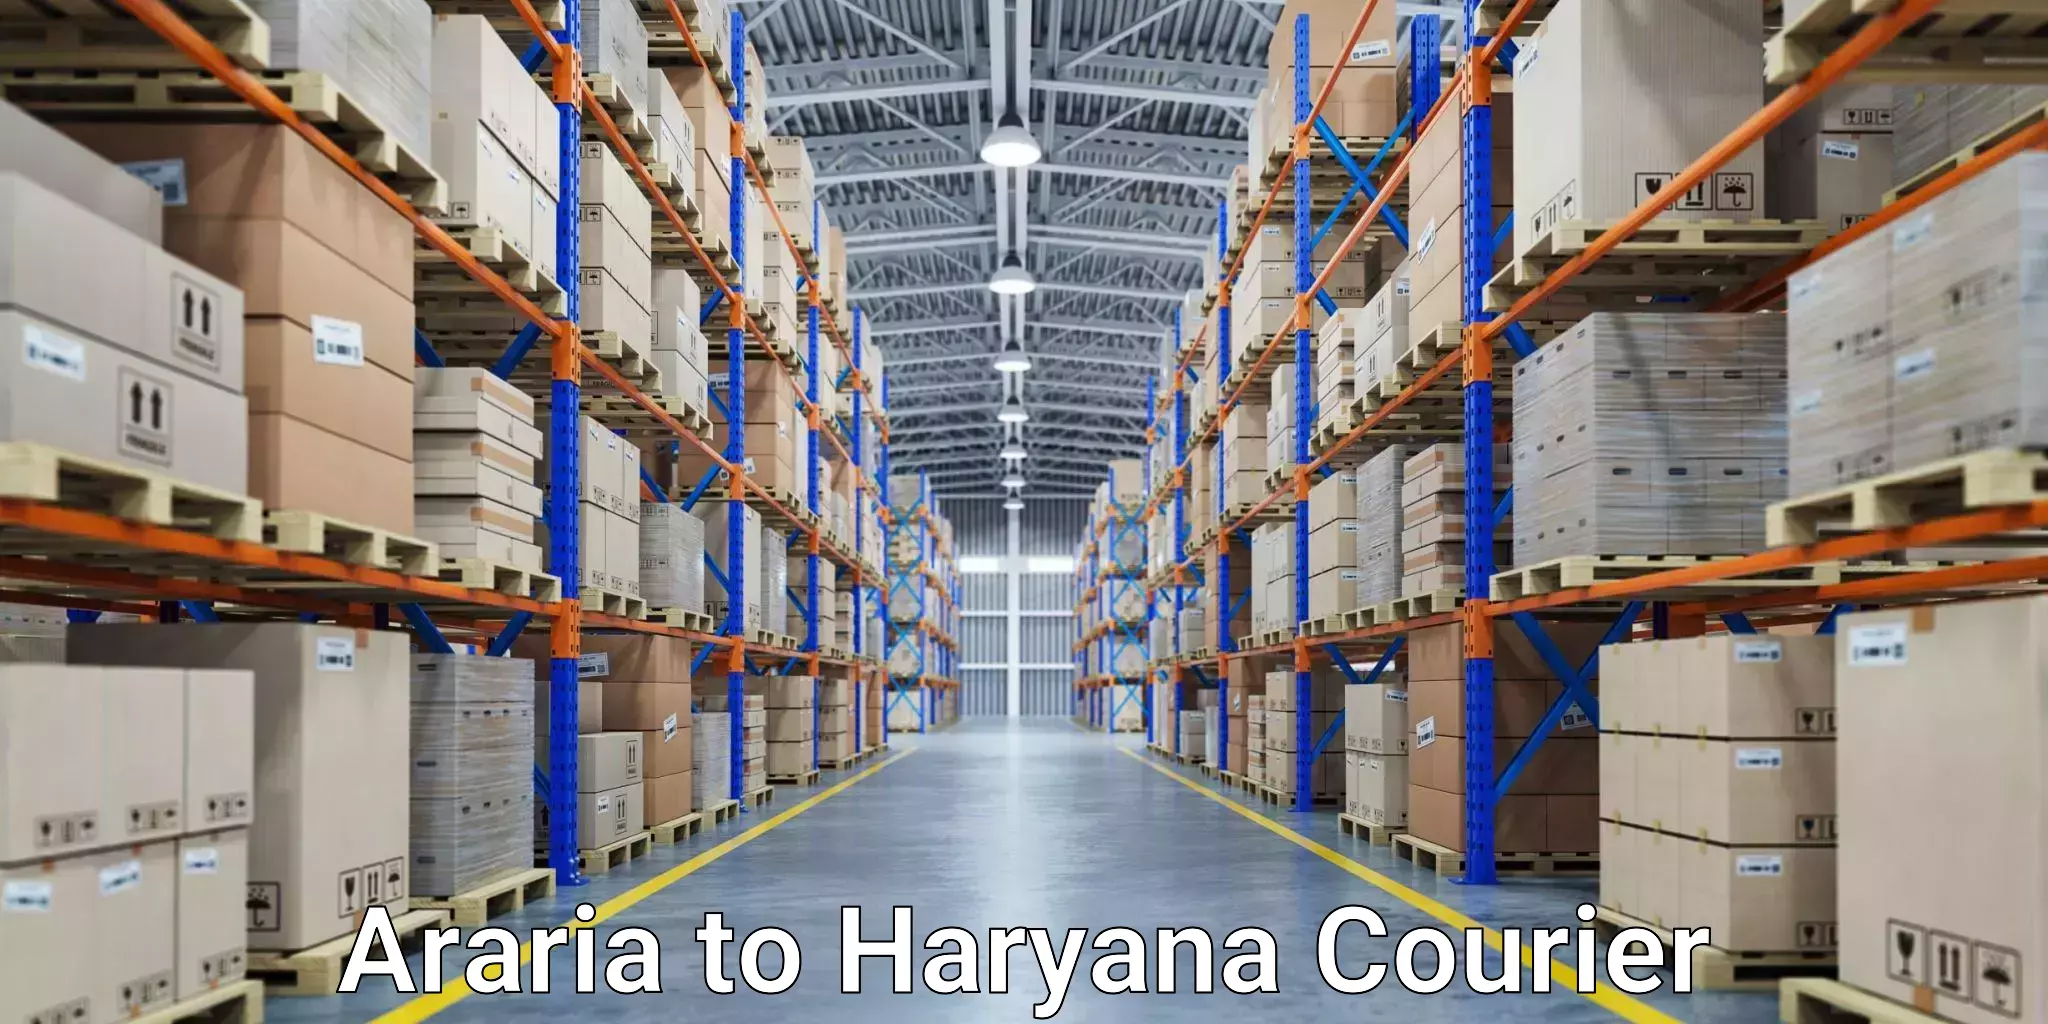 International courier networks Araria to Sonipat